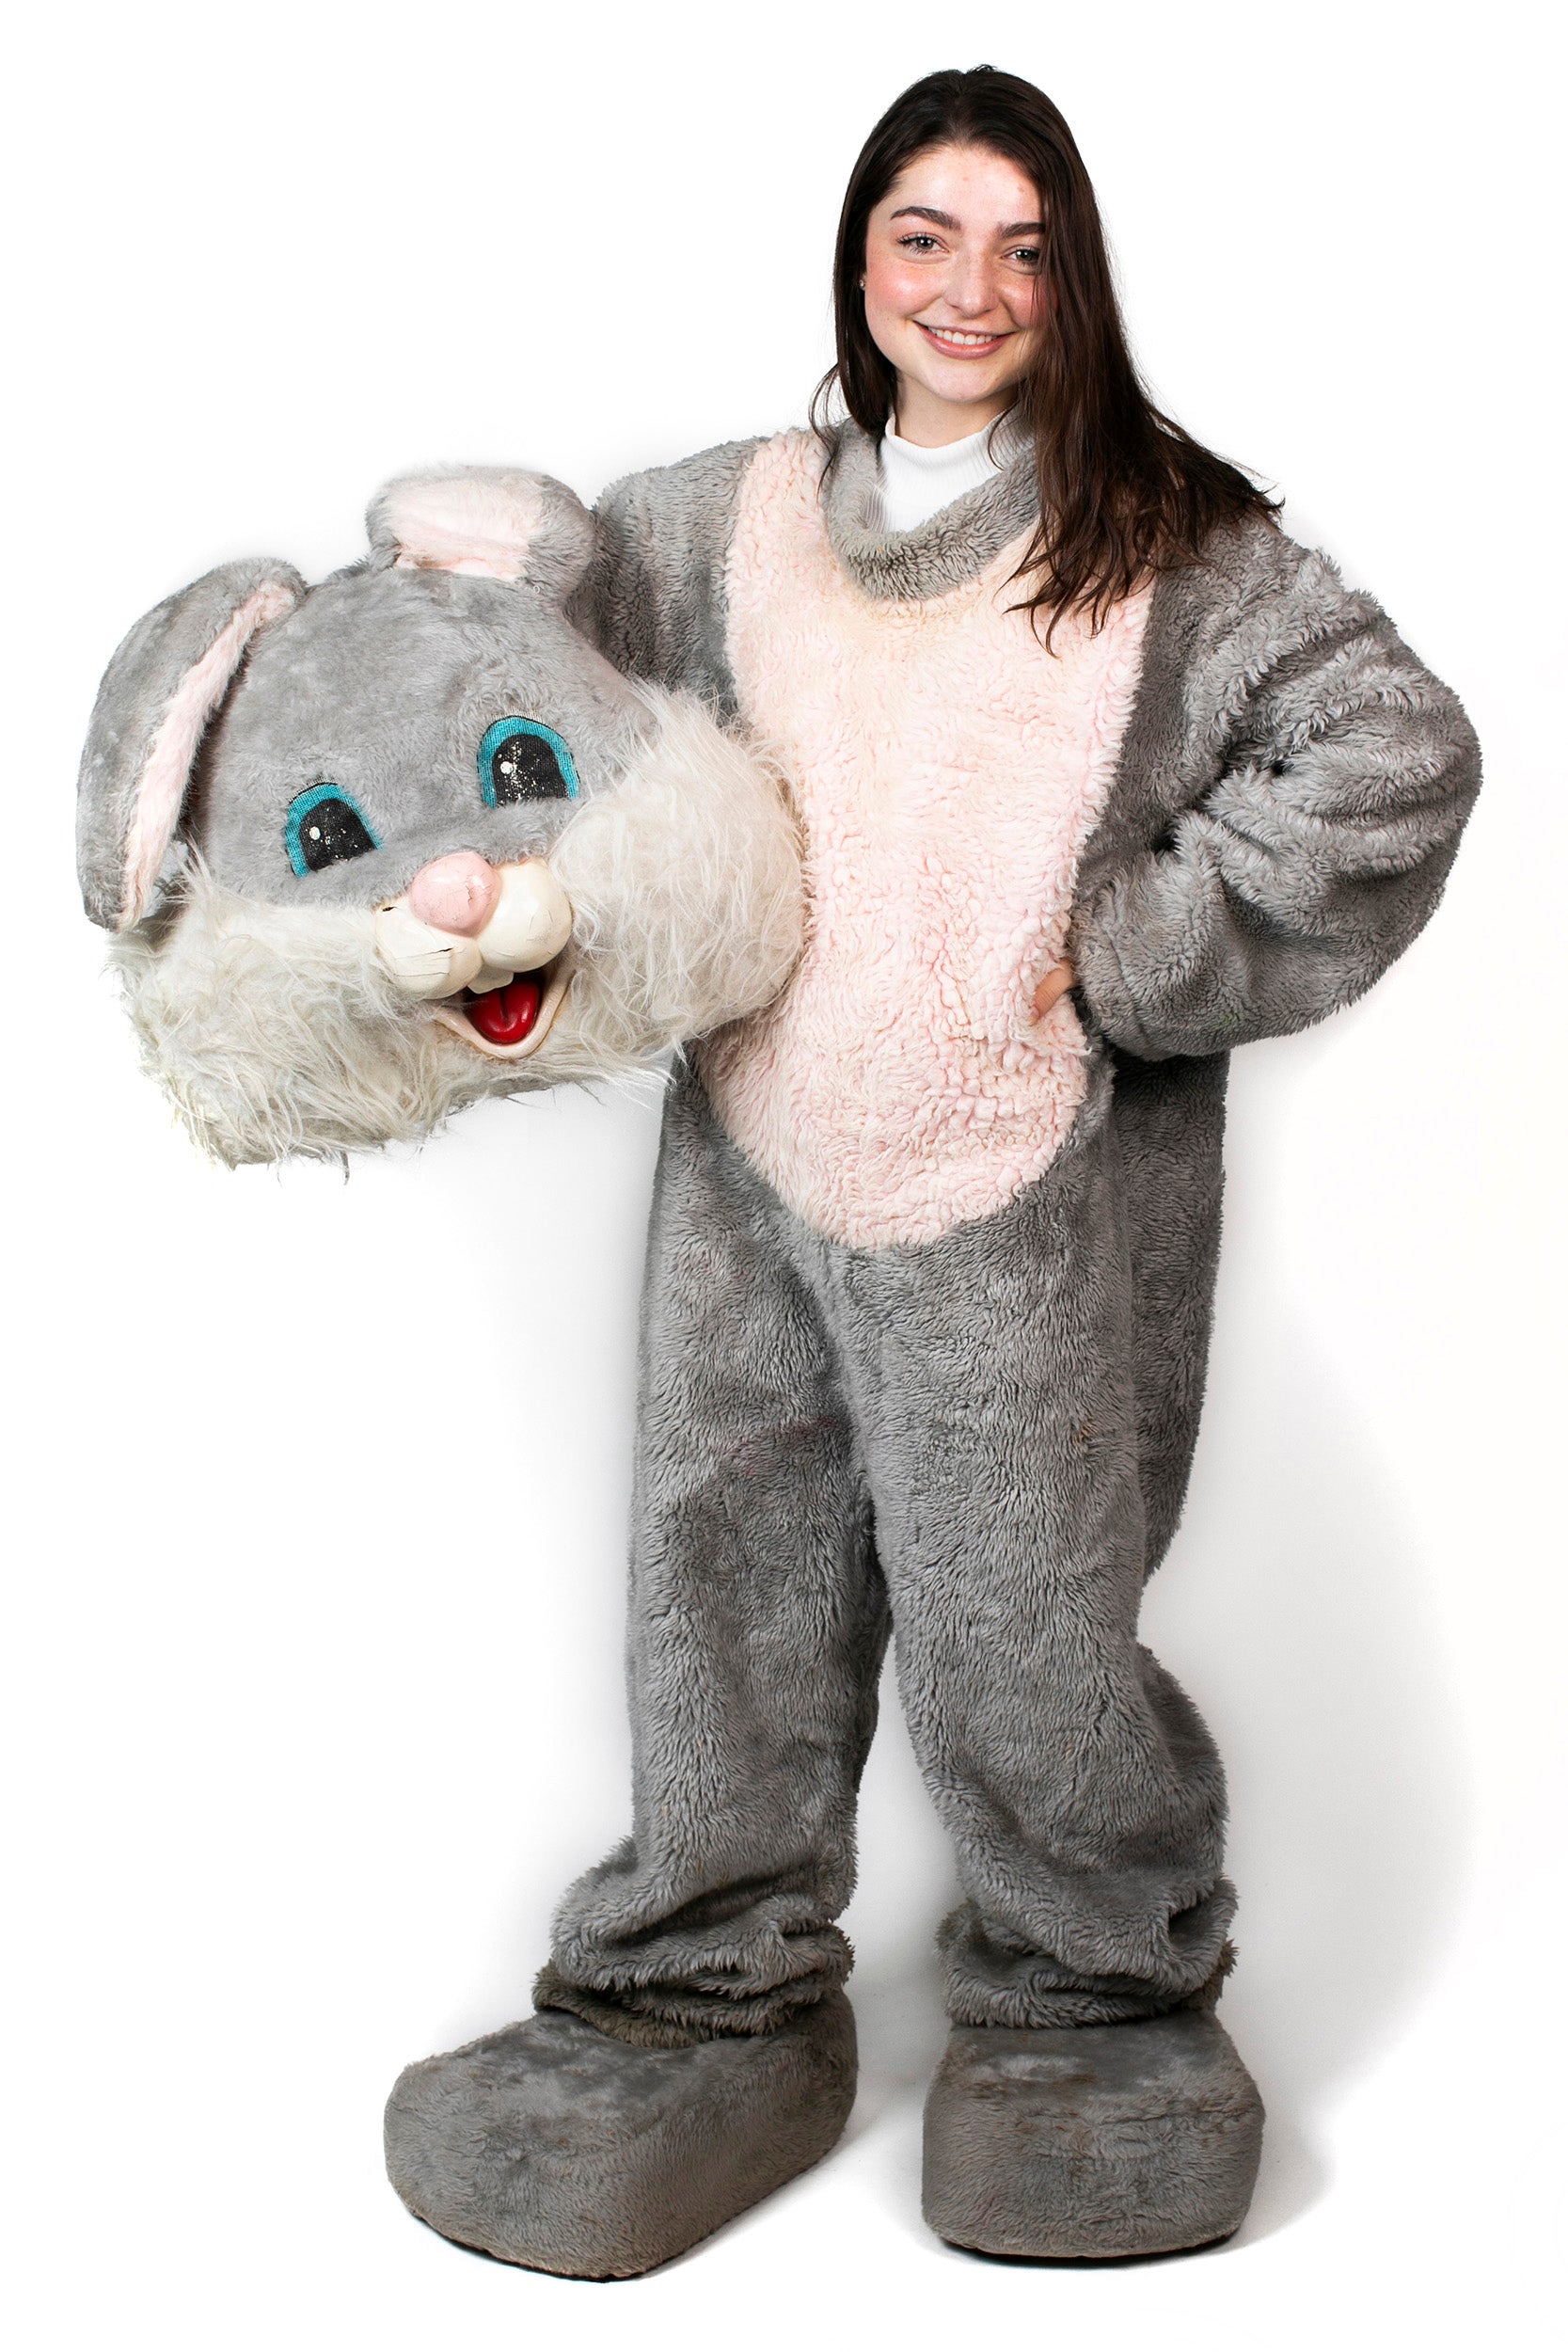 Haley Benbow is dressed as the Hare Mascot for Leverett House.